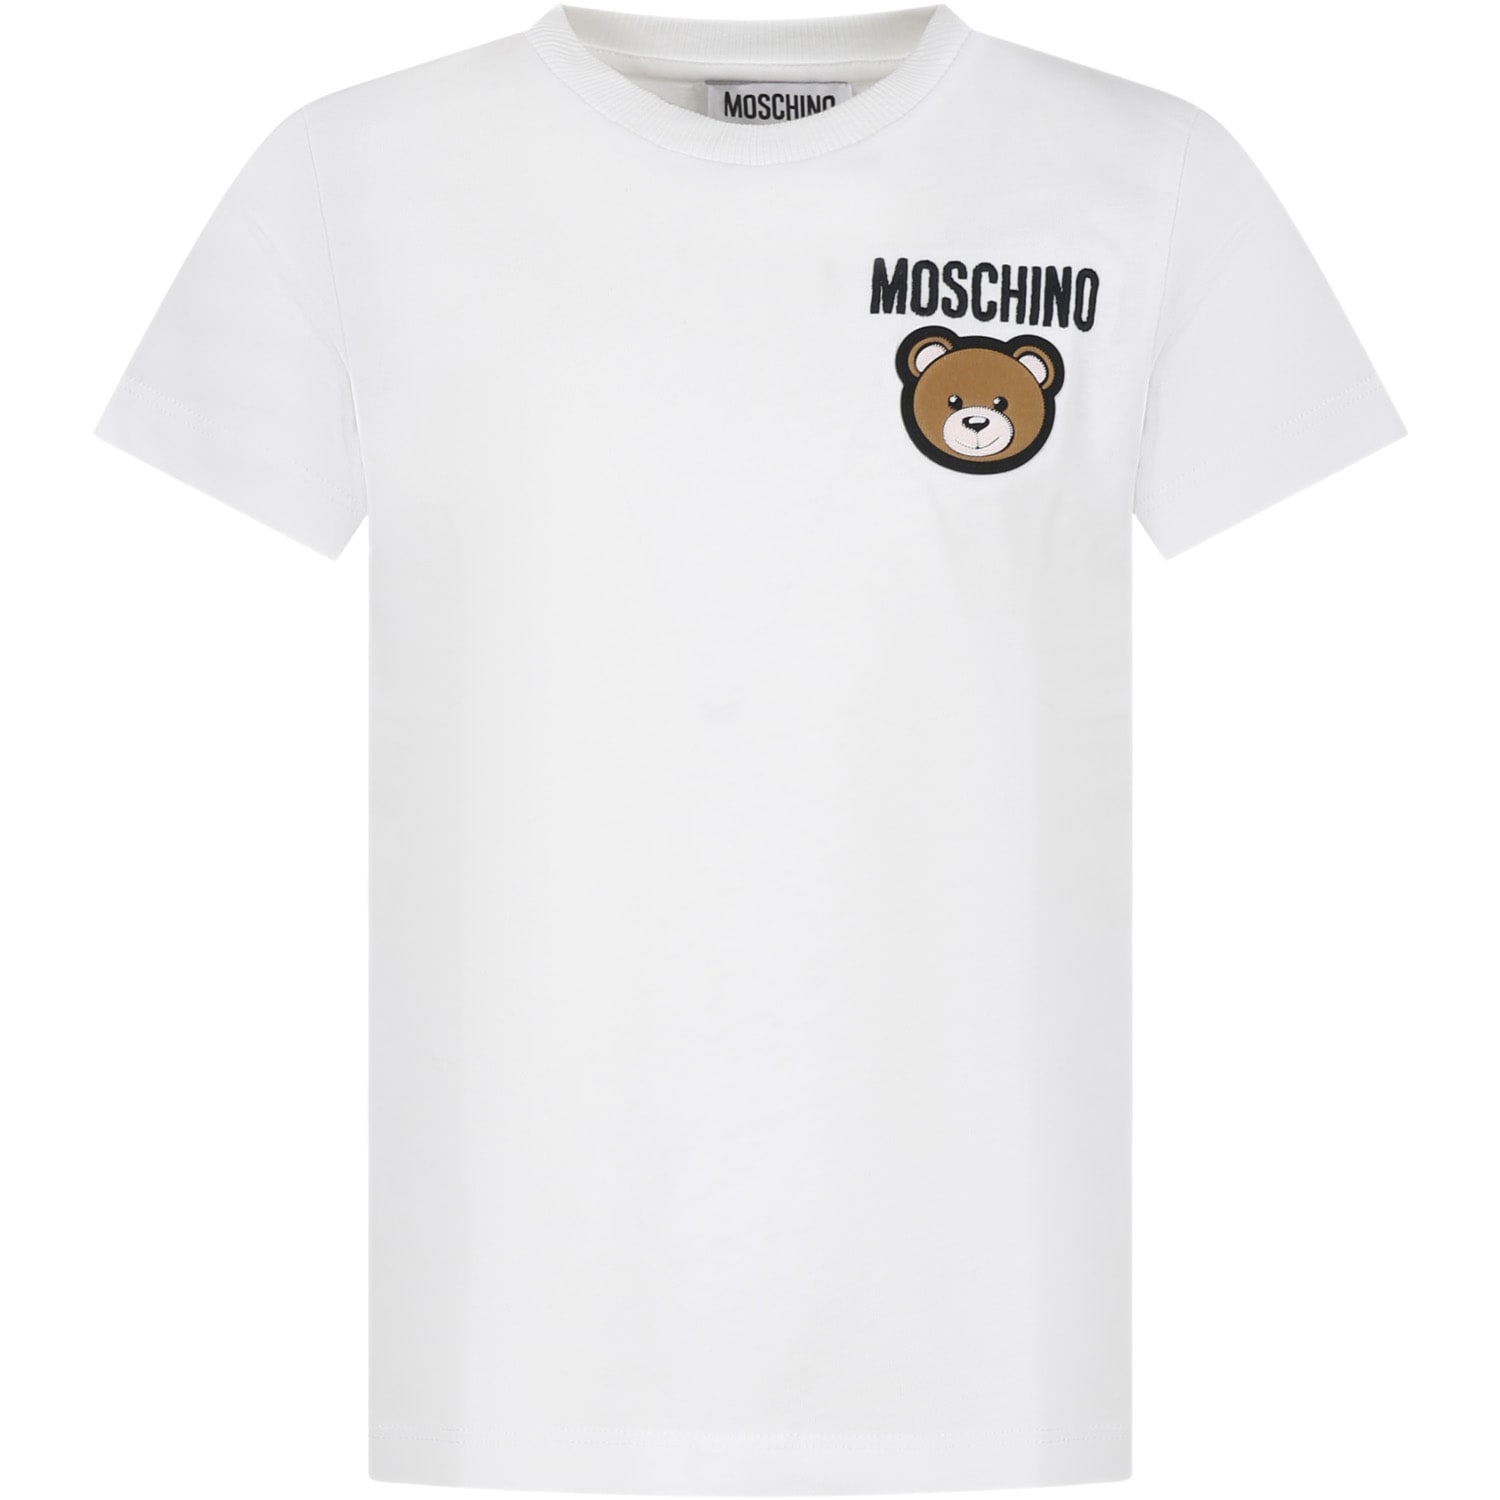 MOSCHINO WHITE T-SHIRT FOR KIDS WITH TEDDY BEAR AND LOGO